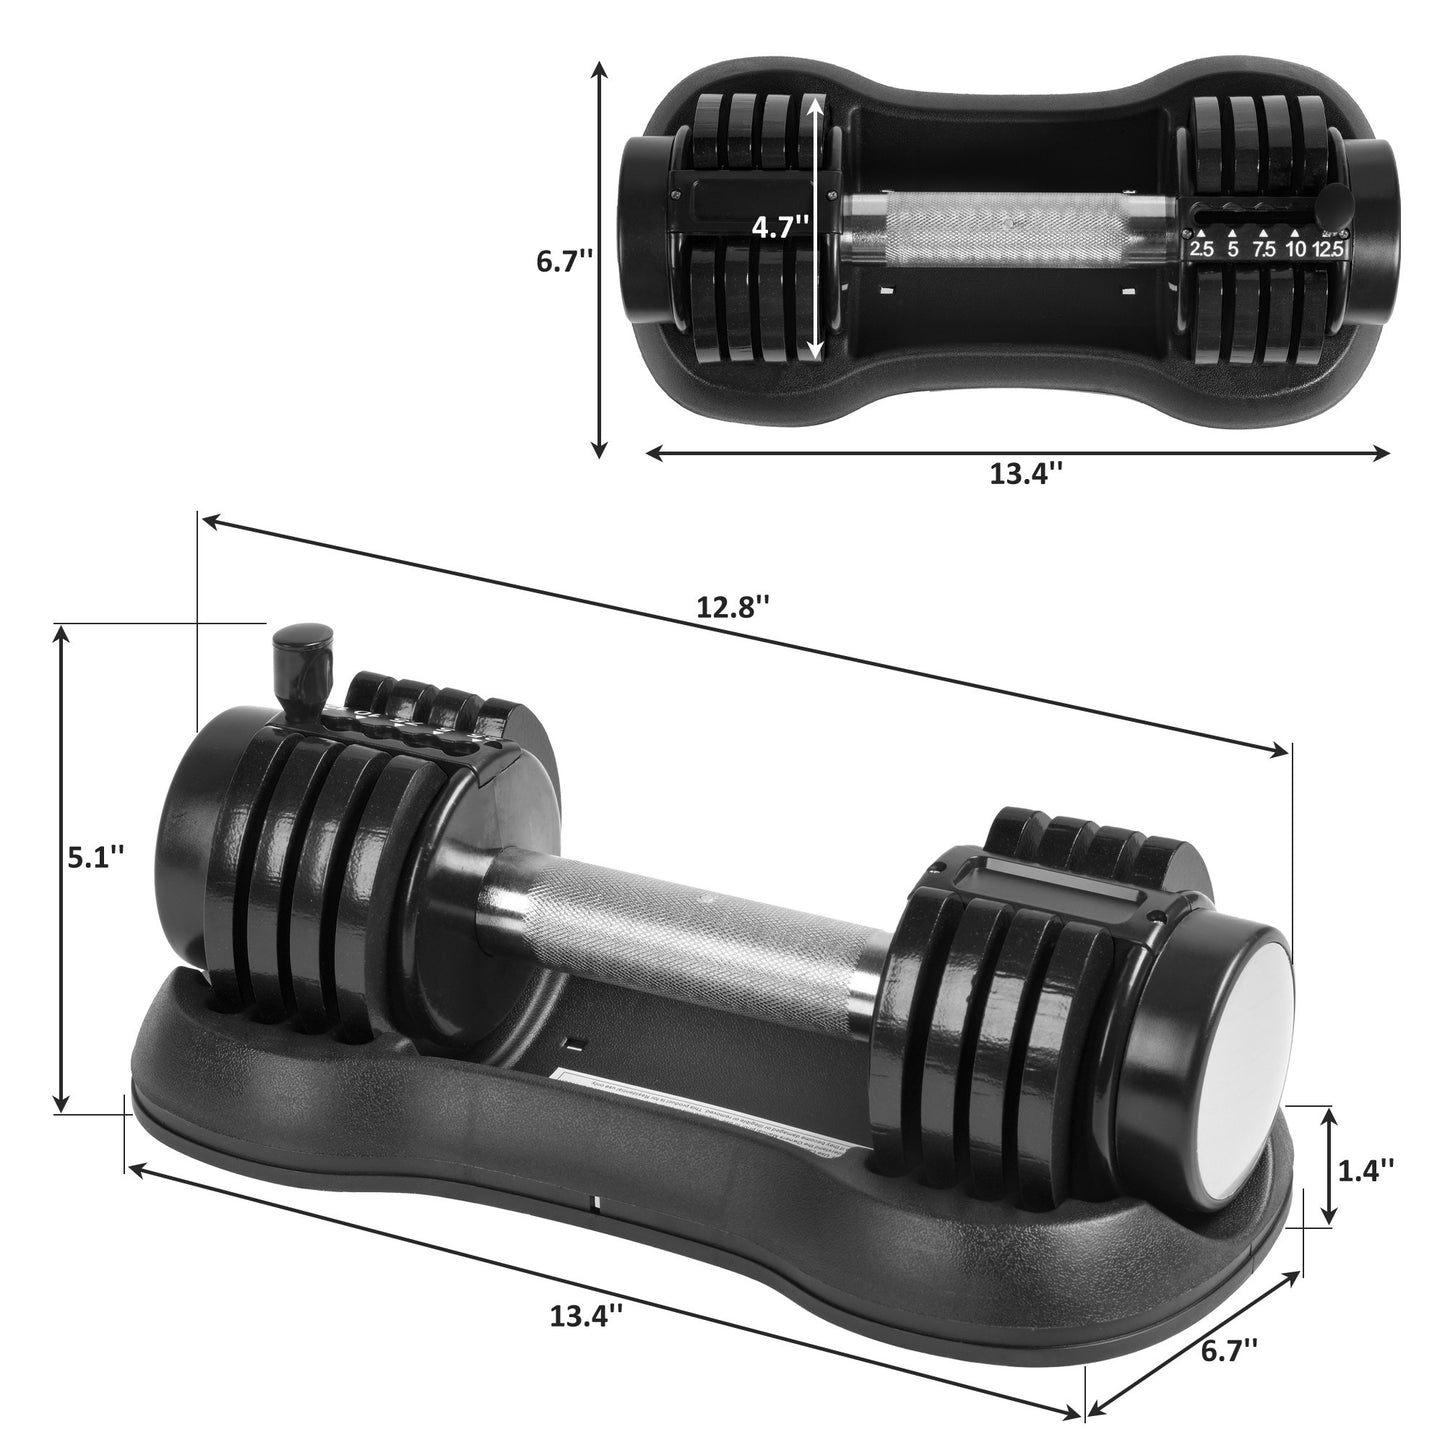 Pair of 12.5 Lbs Adjustable Dumbbell with Handle and Weight Plate for Home Gym black RT